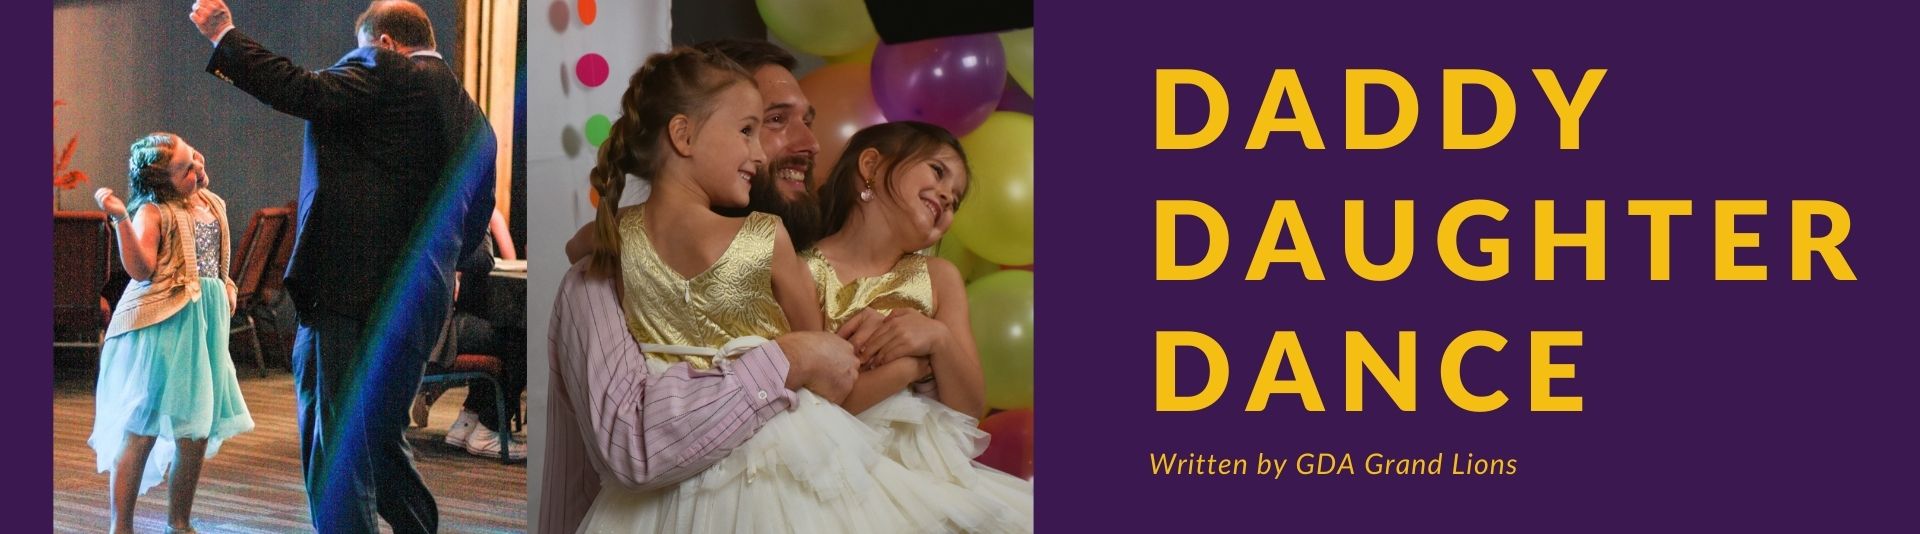 GDA About the Daddy Daughter Dance Blog